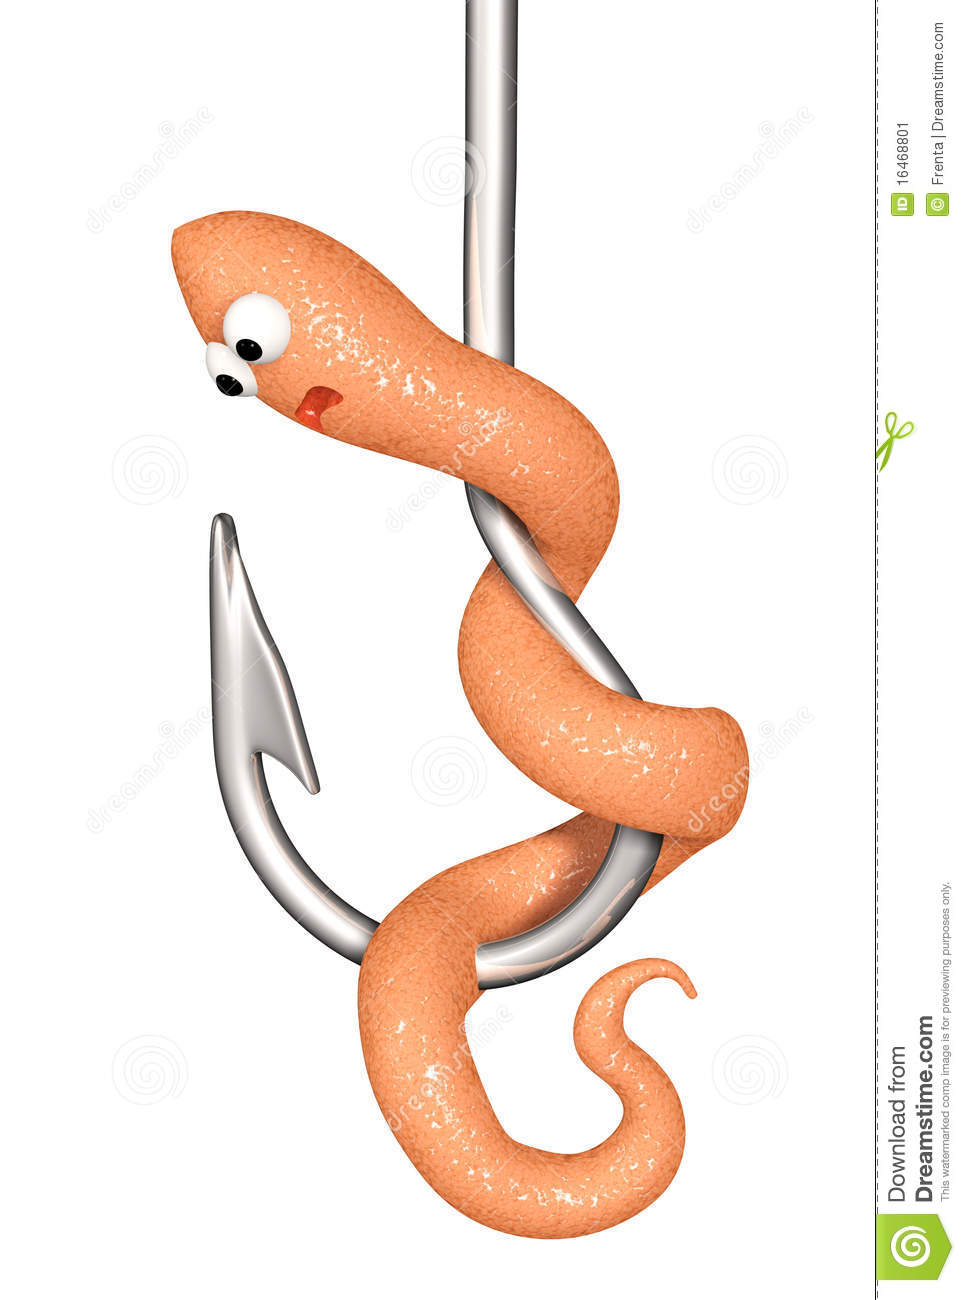 3d Scared Worm On A Fishing Hook  Isolated Over White